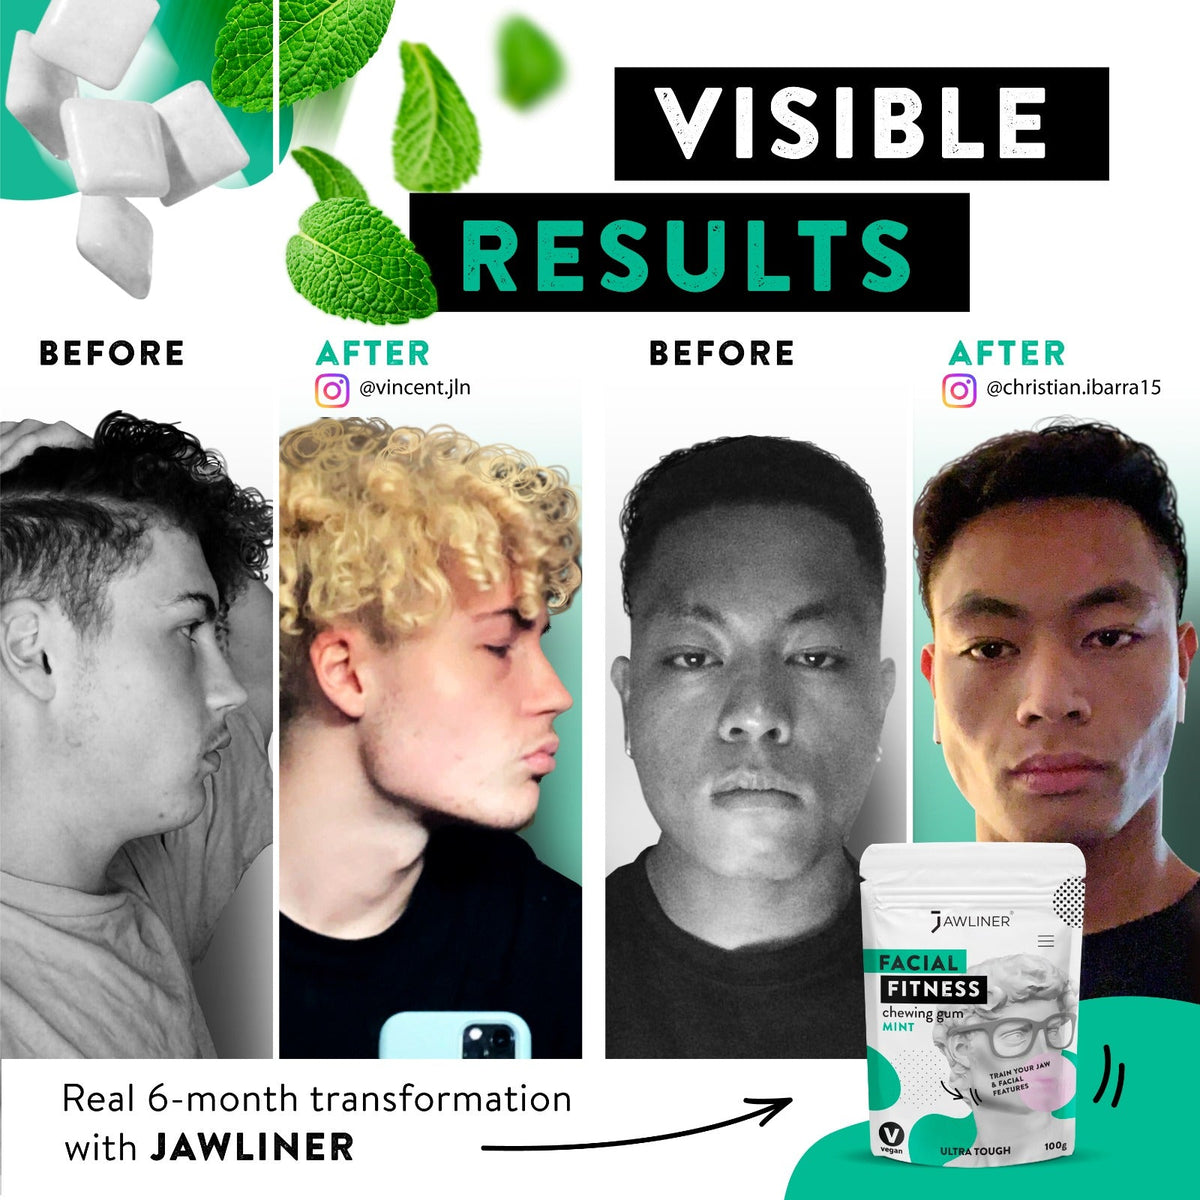 JAWLINER® - Bretts Jawline Chewing Gum - Get a chiseled Jawline